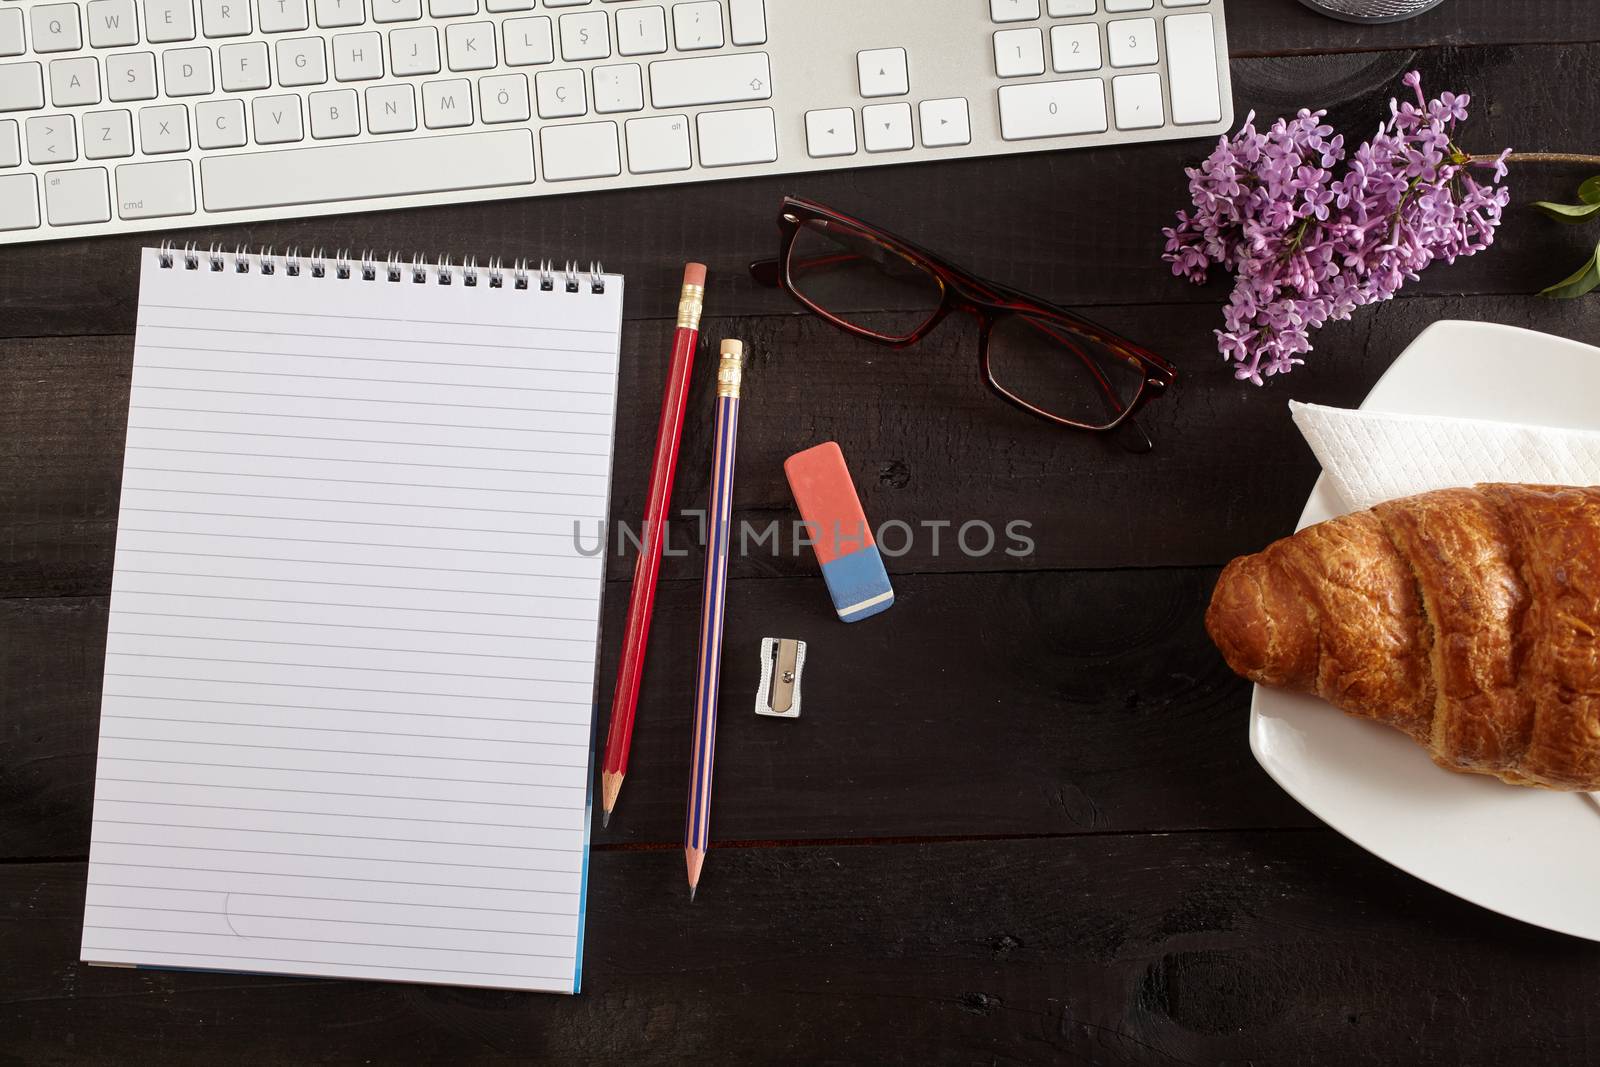 Top view office workplace - keyboard, pencil, glasses, croissant and notebook on black table